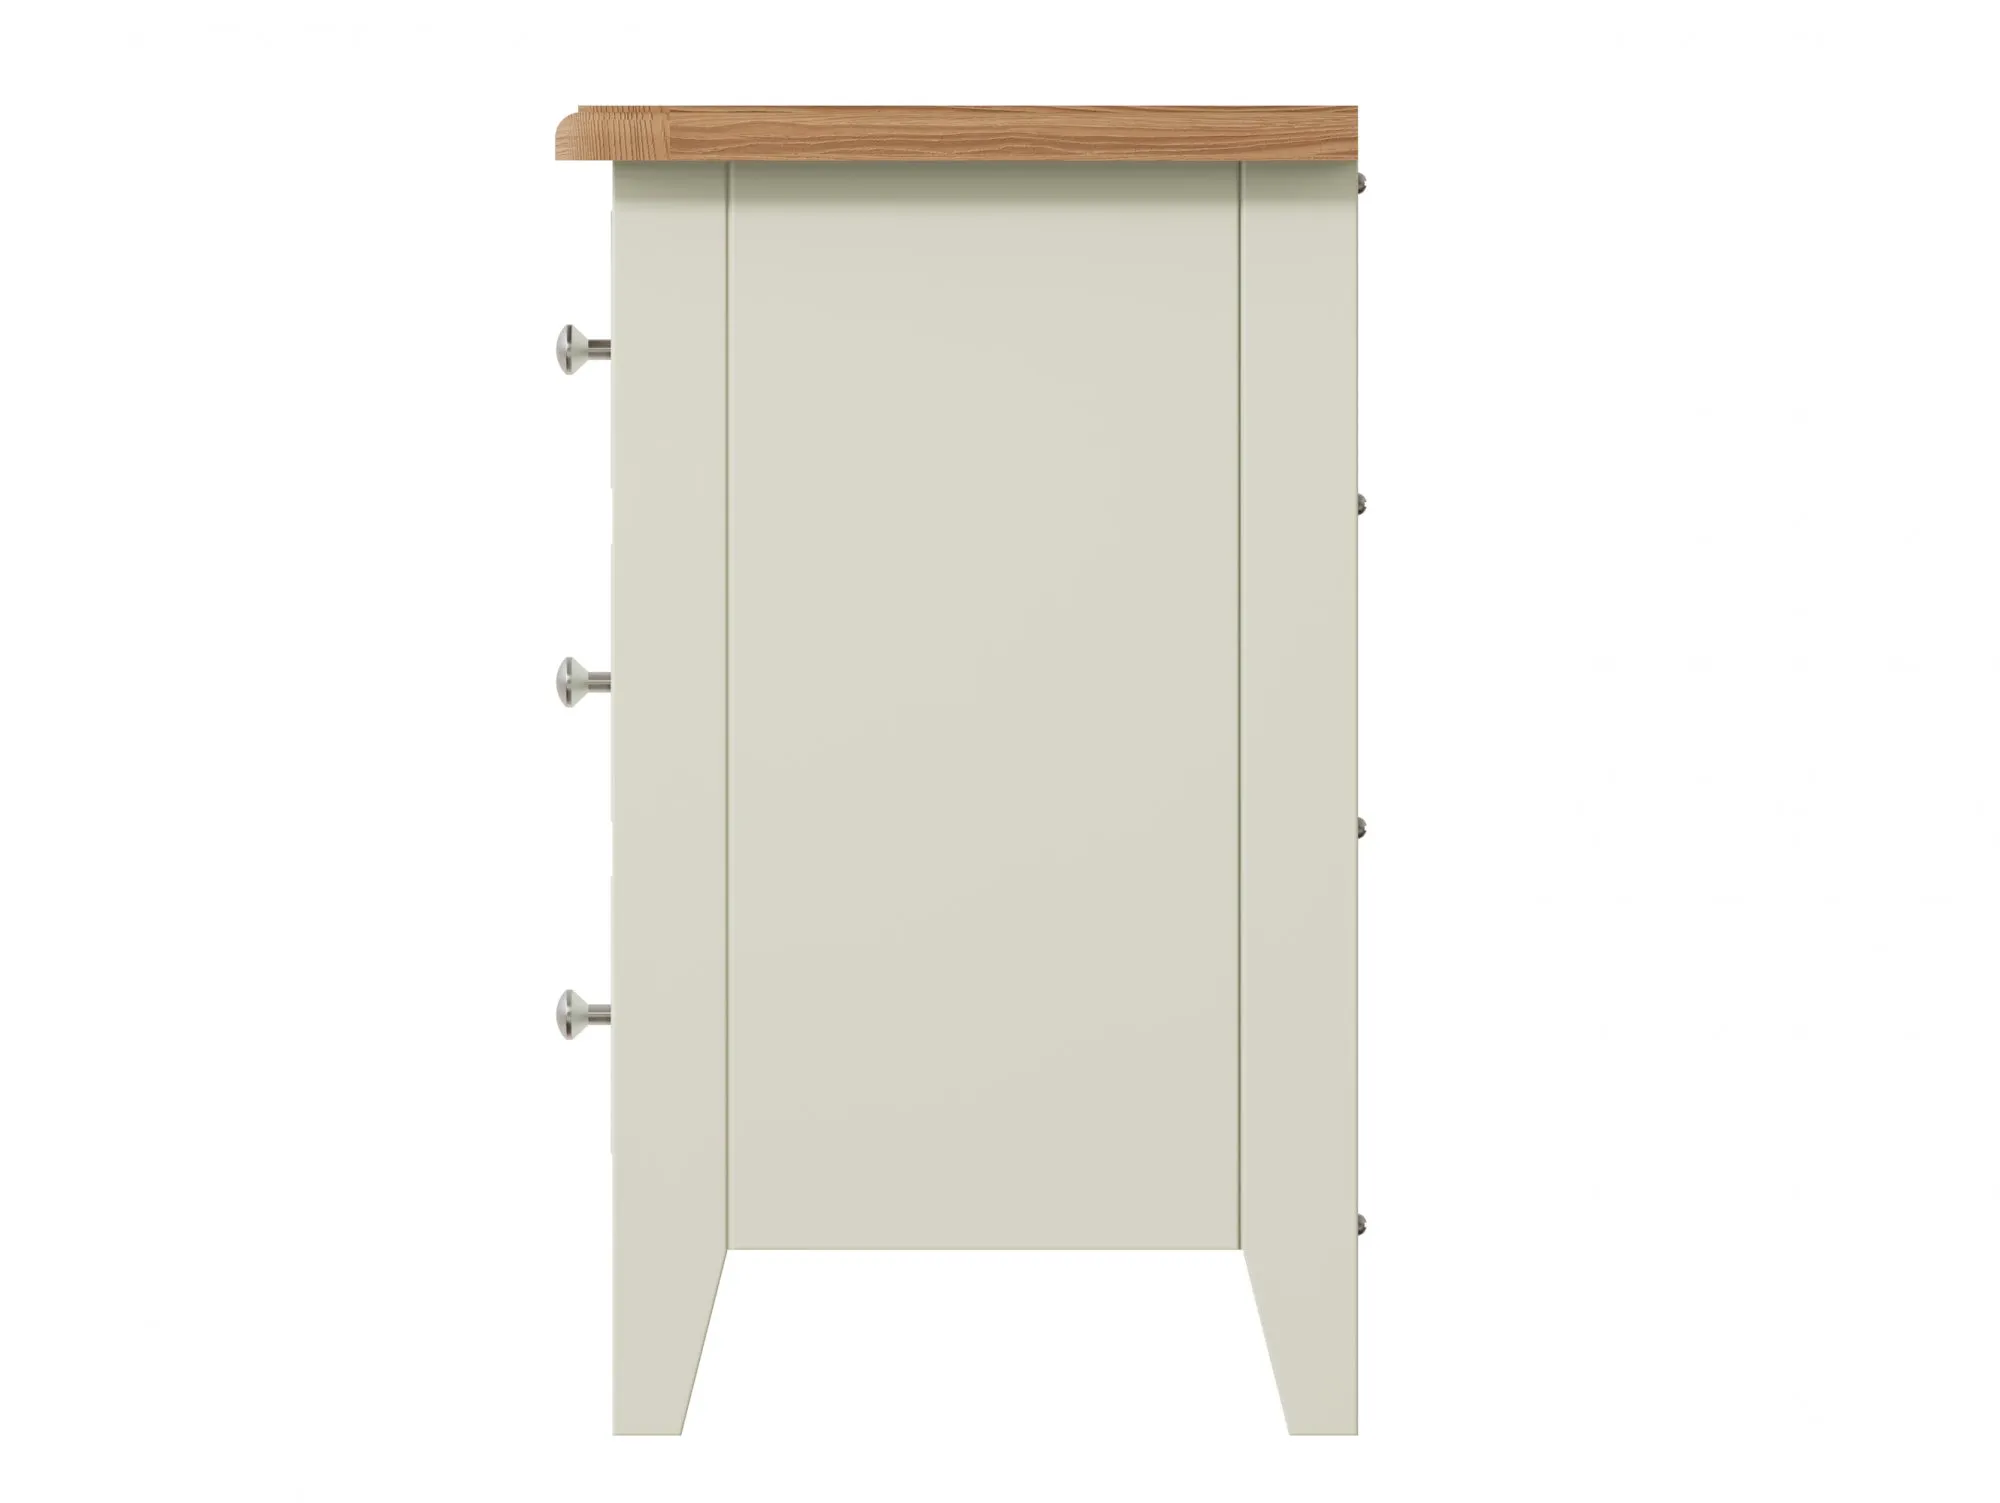 Kenmore Kenmore Patterdale White and Oak 3 Drawer Large Bedside Table (Assembled)